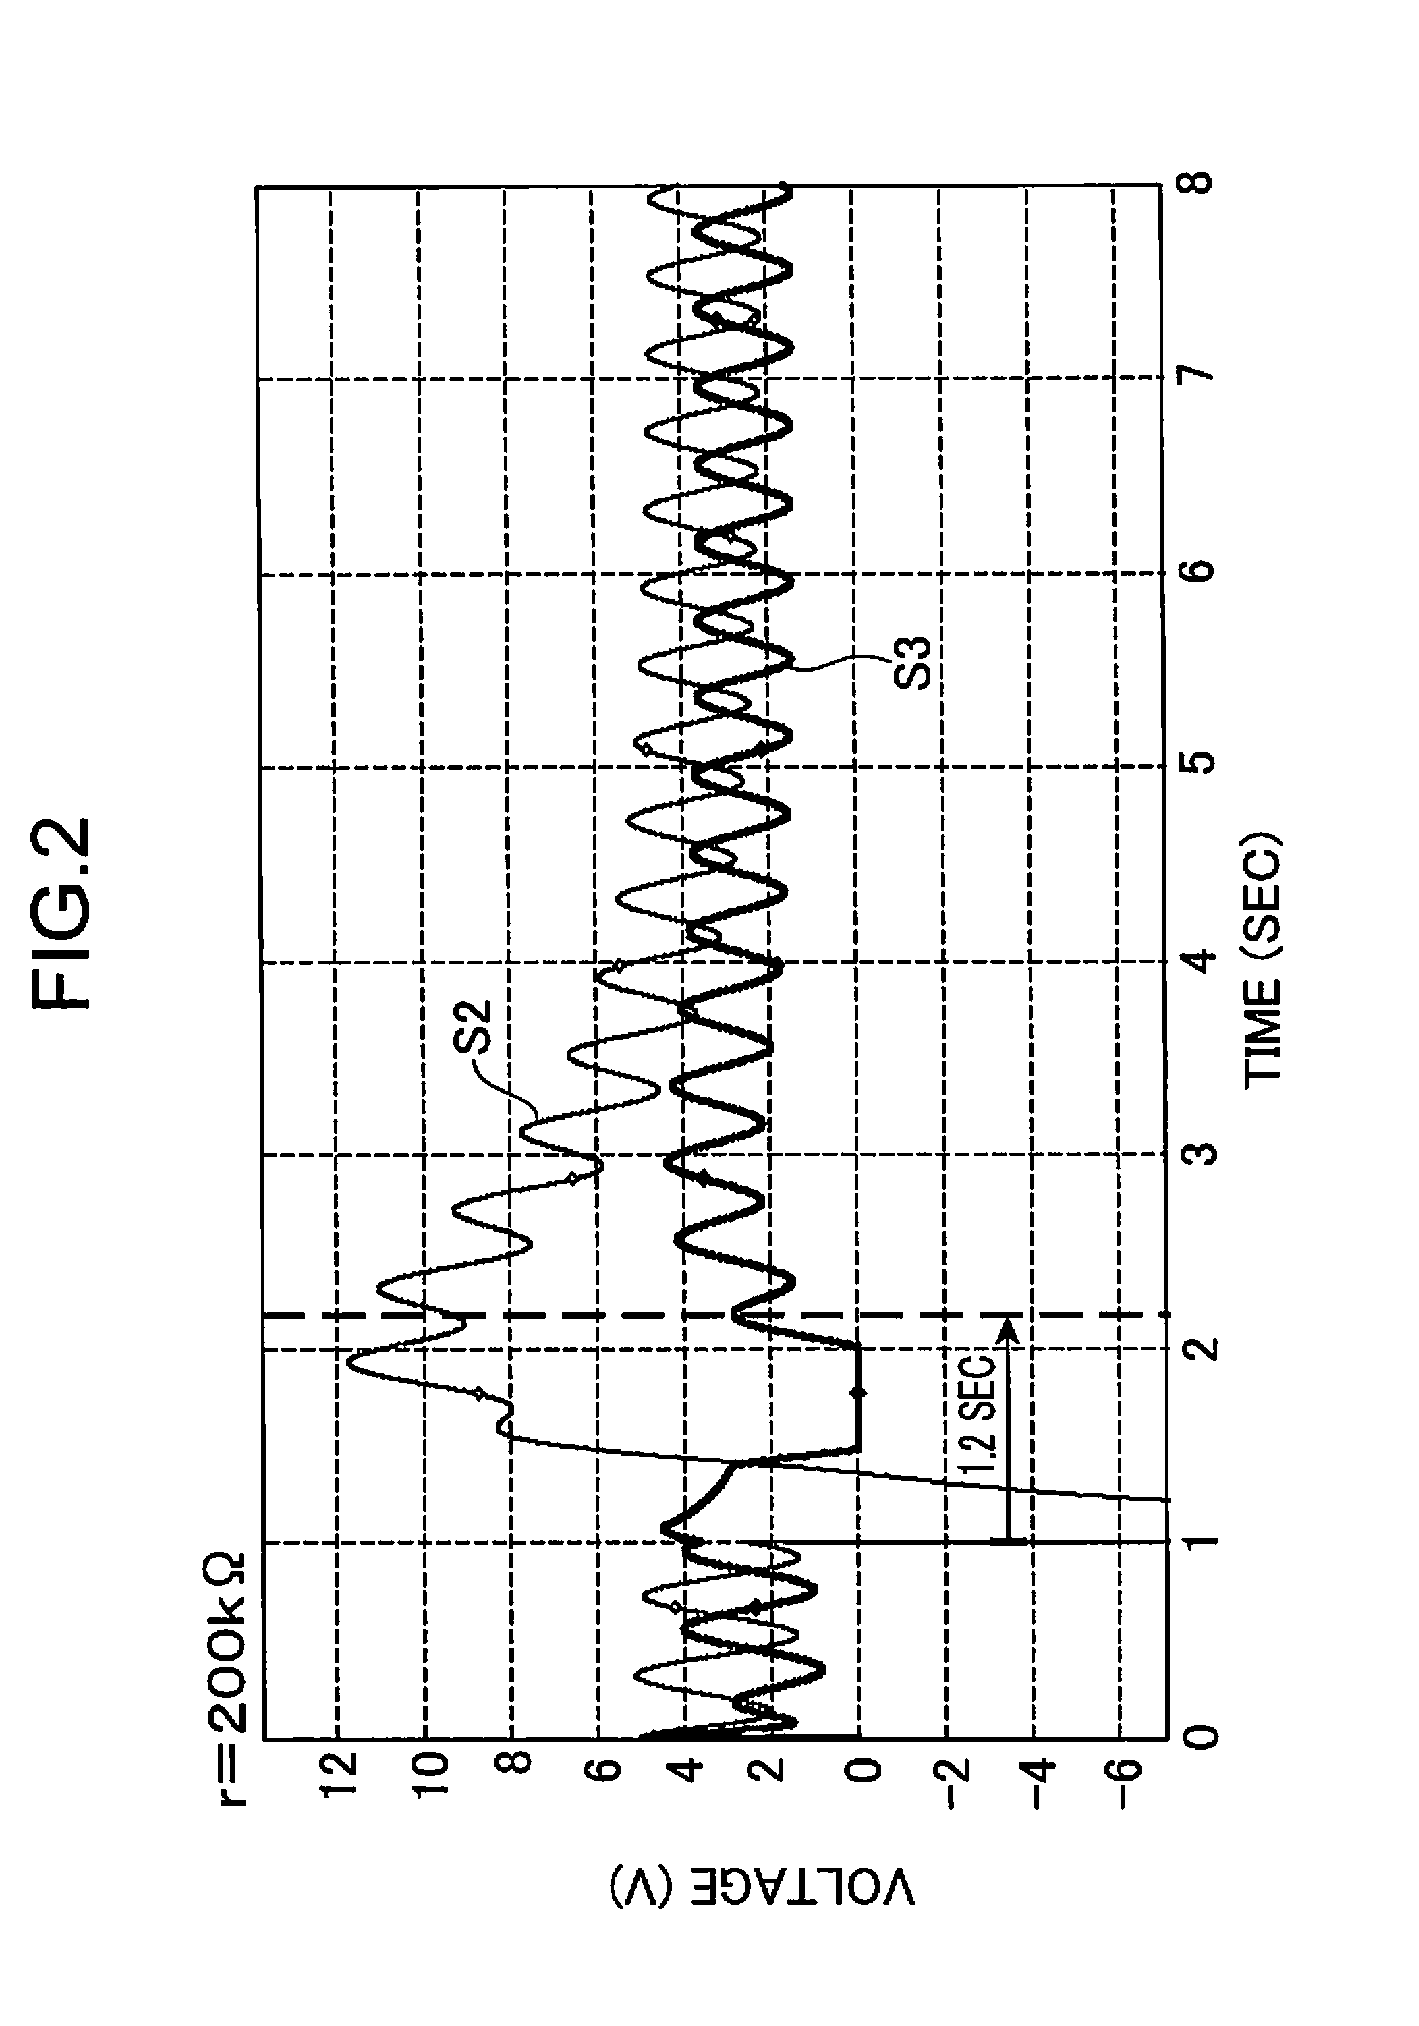 Vehicular insulation resistance detection apparatus